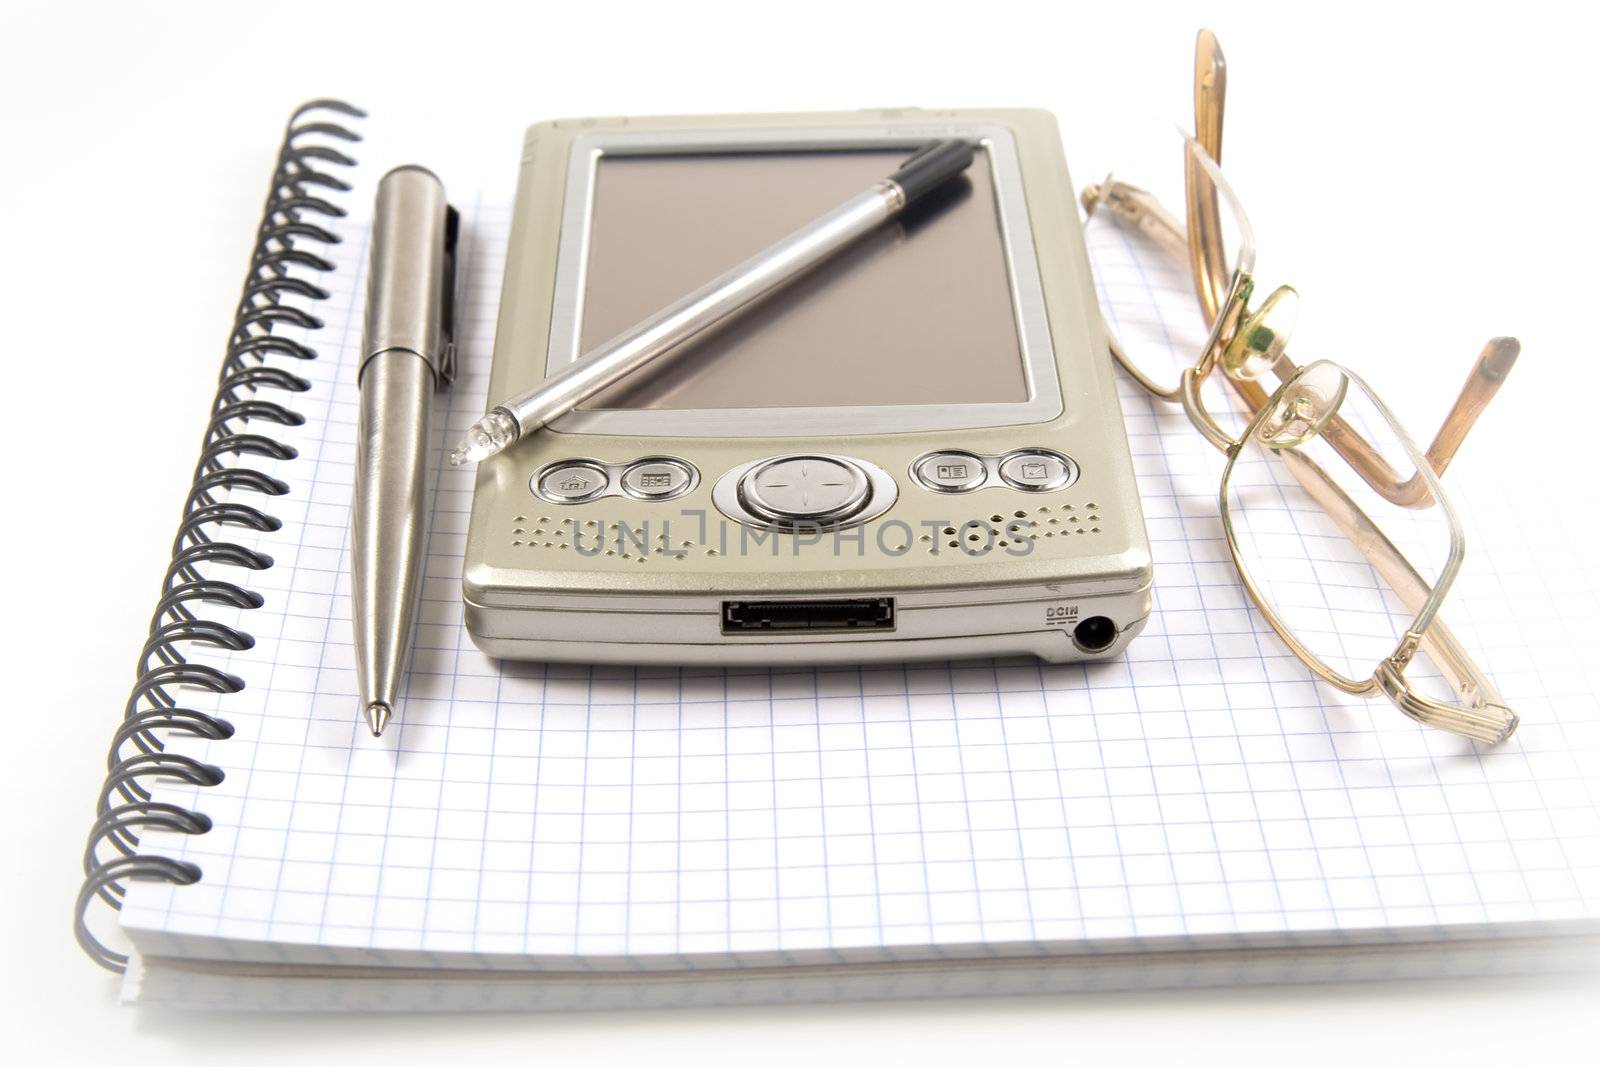 Vignetting image of pen, PDA  and eyeglasses on spiral notebook by serpl